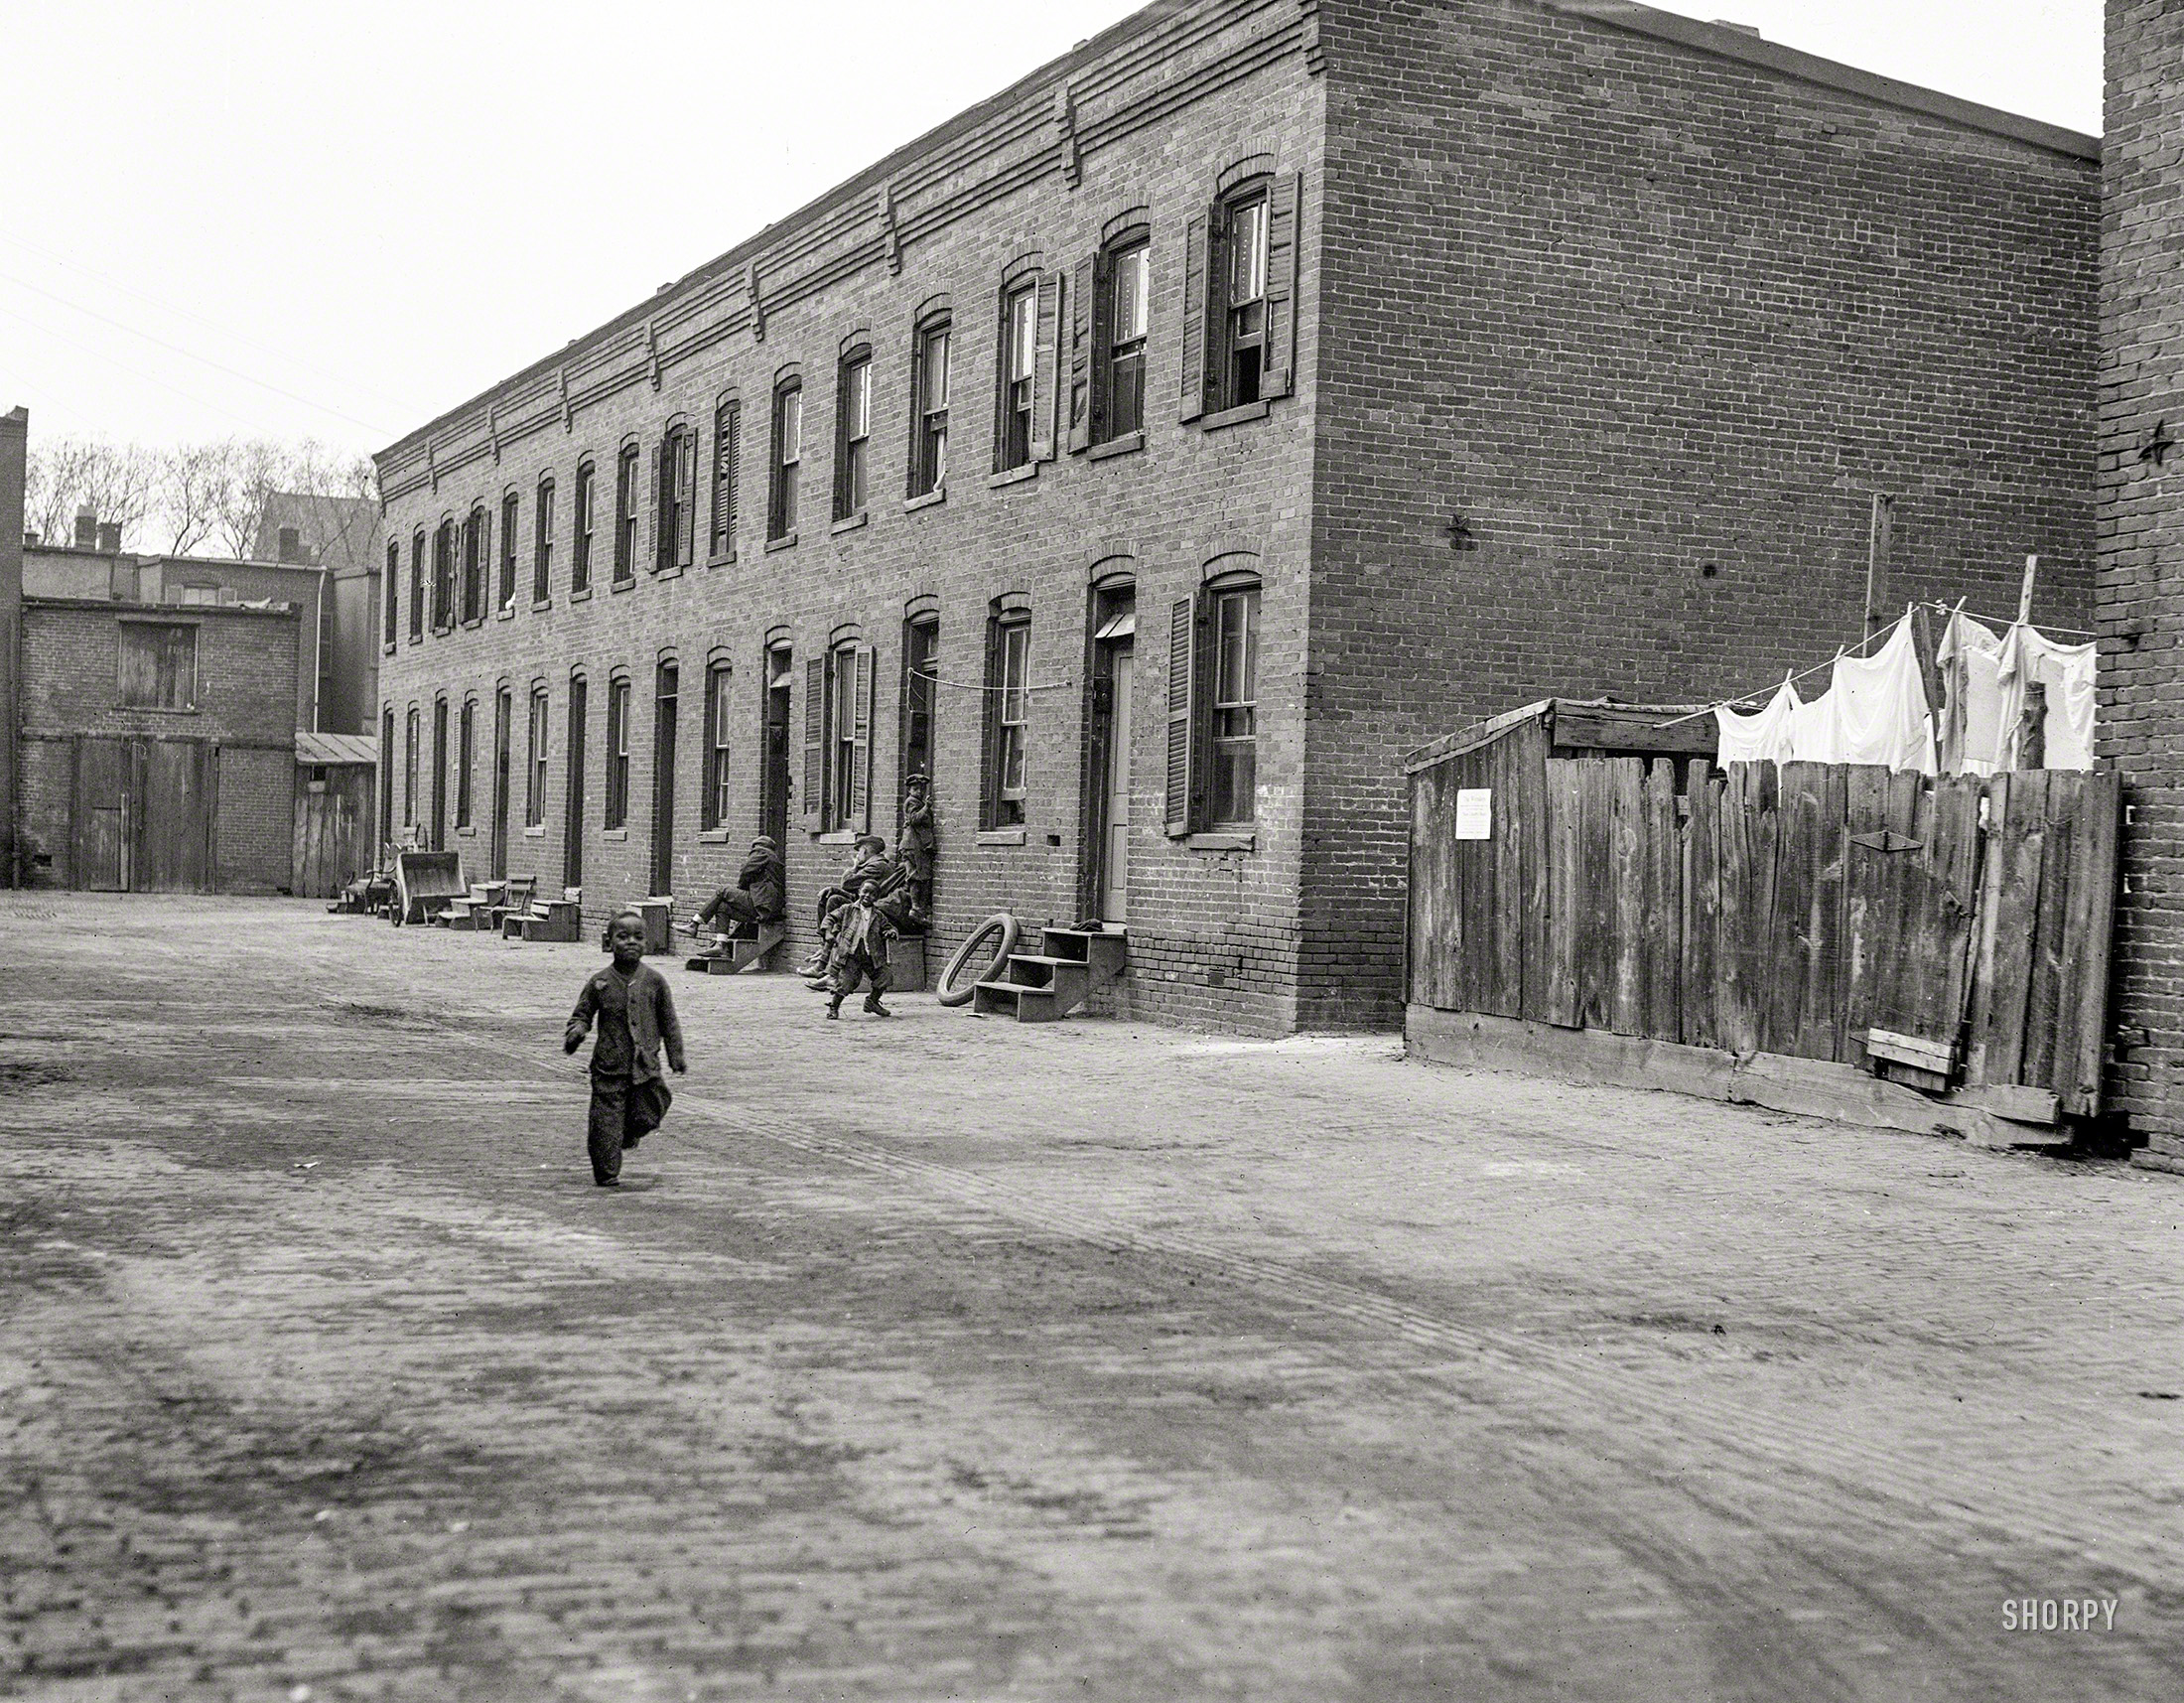 "City rowhouses." Another entry in this series of Harris & Ewing views of back-alley Washington from 1923. 4x5 inch glass negative. View full size.